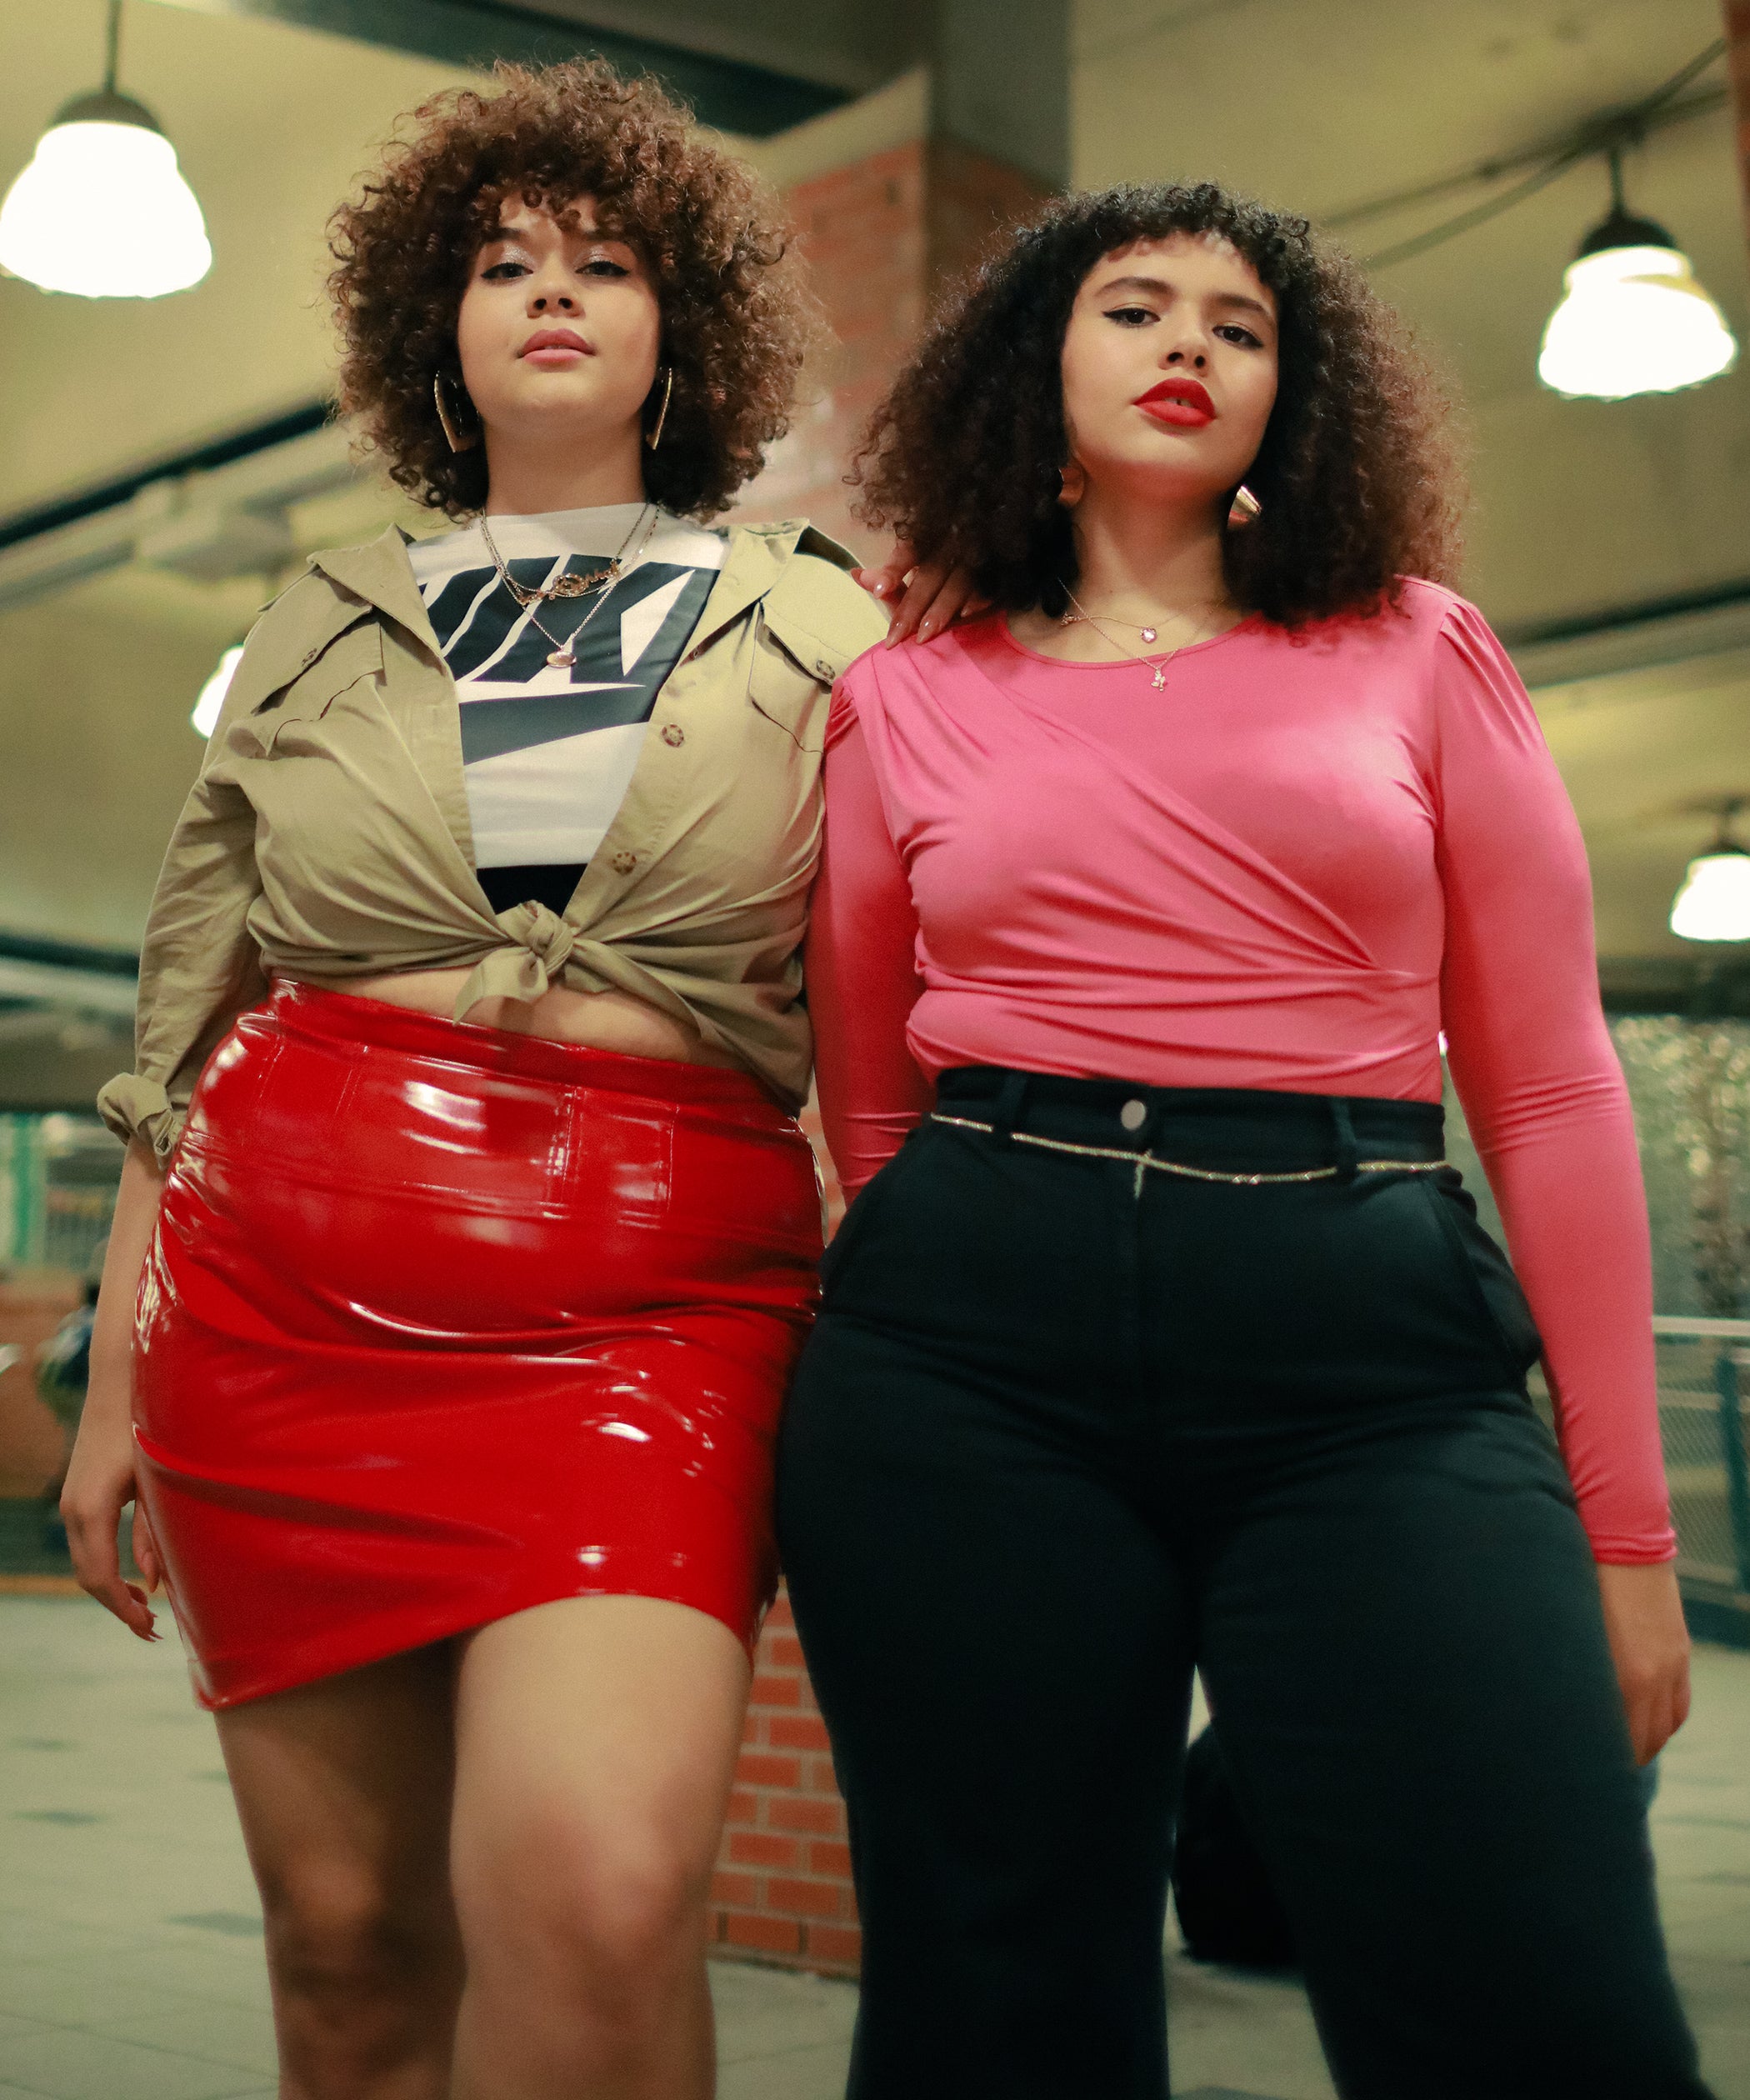 Fashion Brands Plus Size Lines Keep Failing — Why?